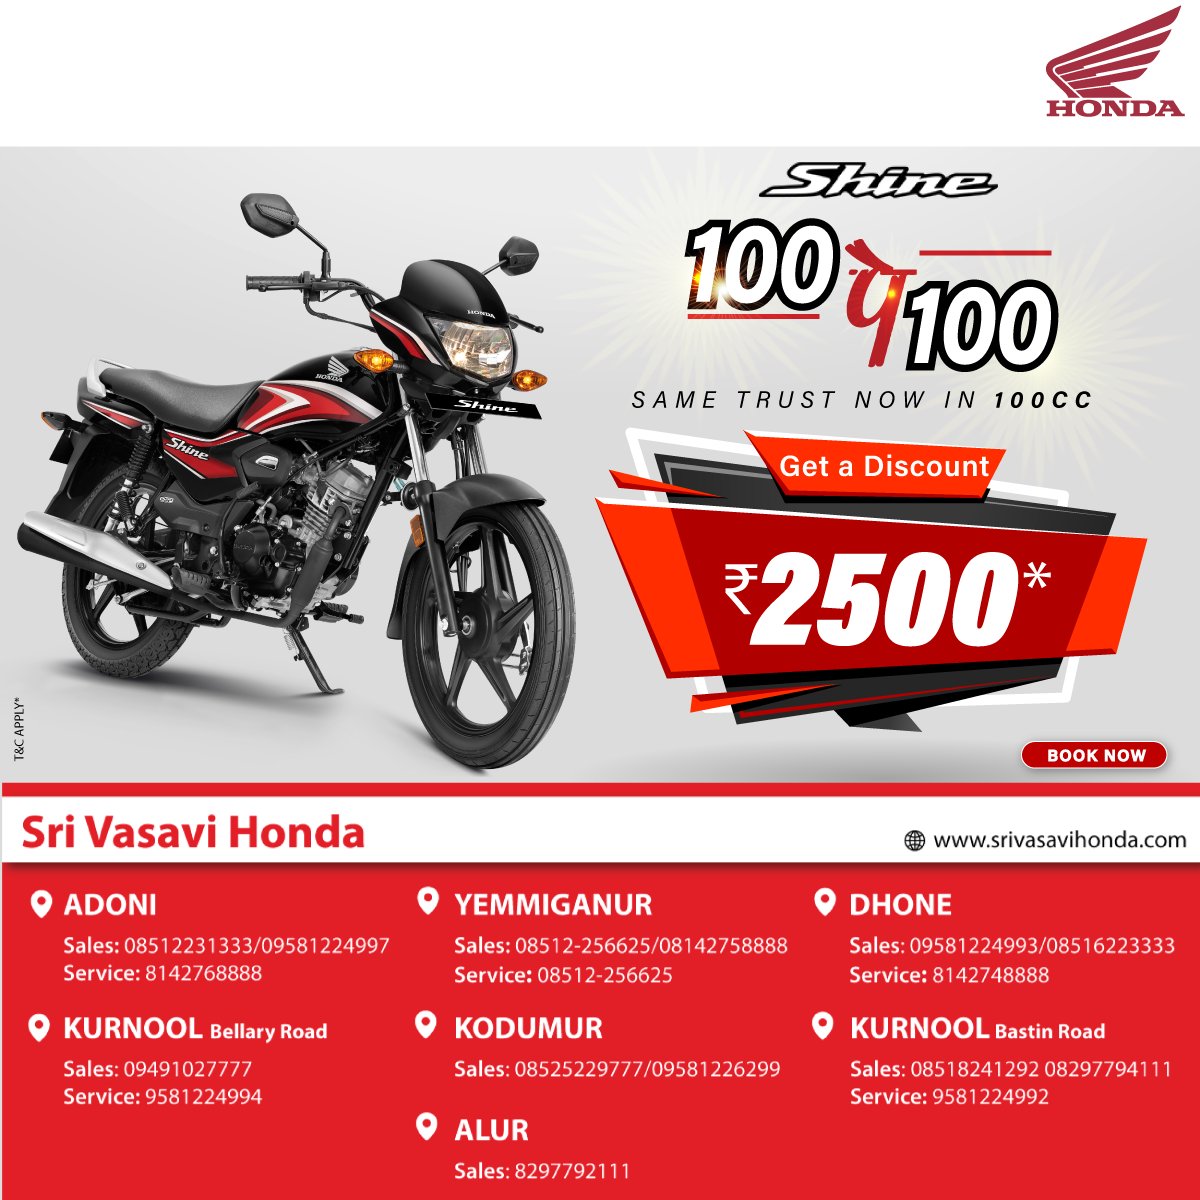 Experience the same trust, now in the #HondaShine100cc! Get a discount of ₹2500*. Upgrade your ride with reliability and style. Don't miss out! 🏍️💨 #HondaMotorcycles #UpgradeNow
T&C Apply*
Book Now!
To know more, please visit: srivasavihonda.com
📲09491027777